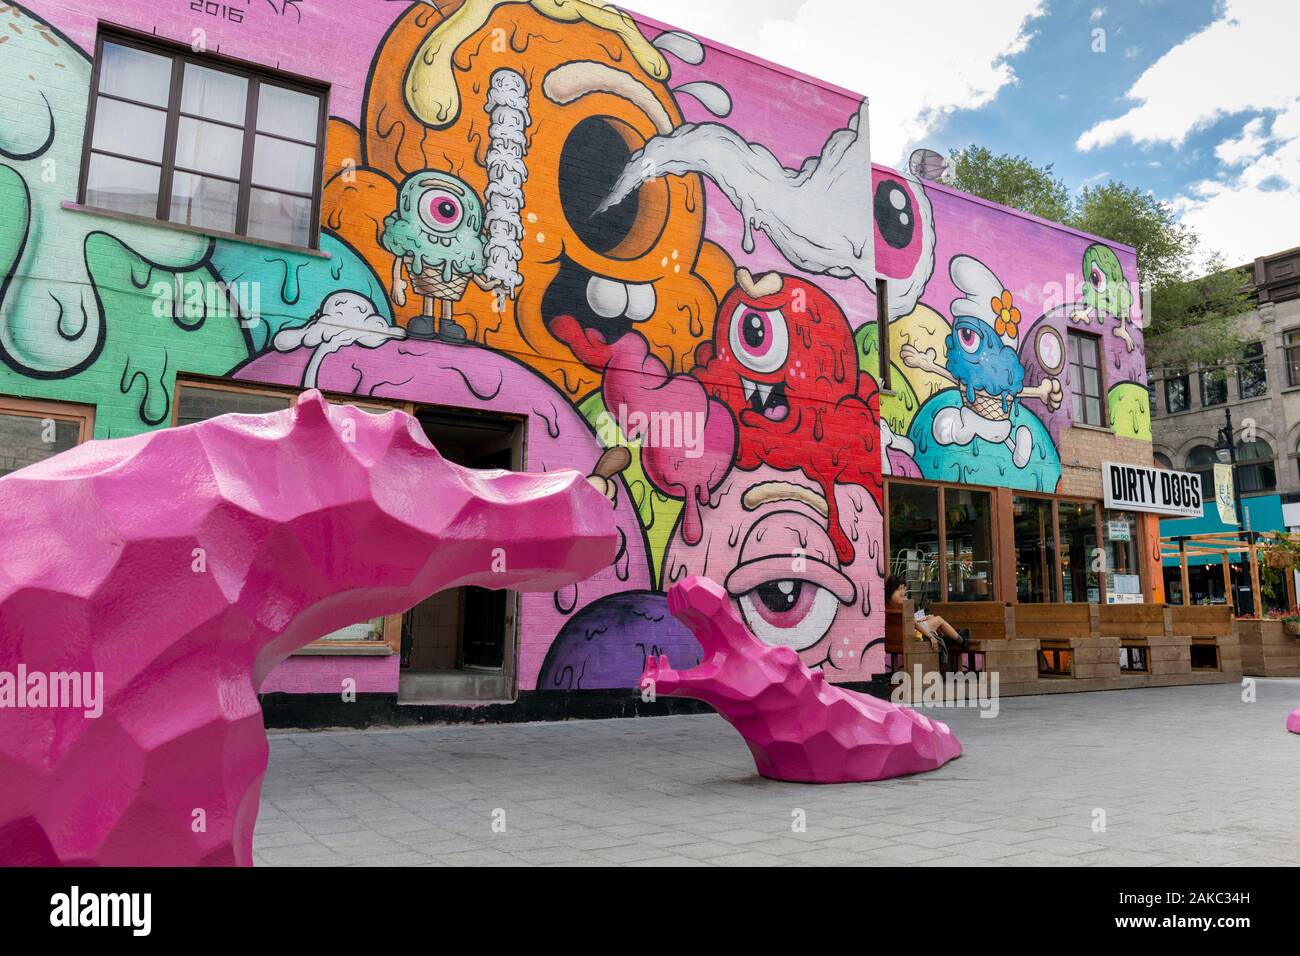 Canada, Province of Quebec, Montreal, the Plateau-Mont-Royal district, the new Guilbault public square, pink hippopotamus sculptures and mural painting by Buff Monster Stock Photo